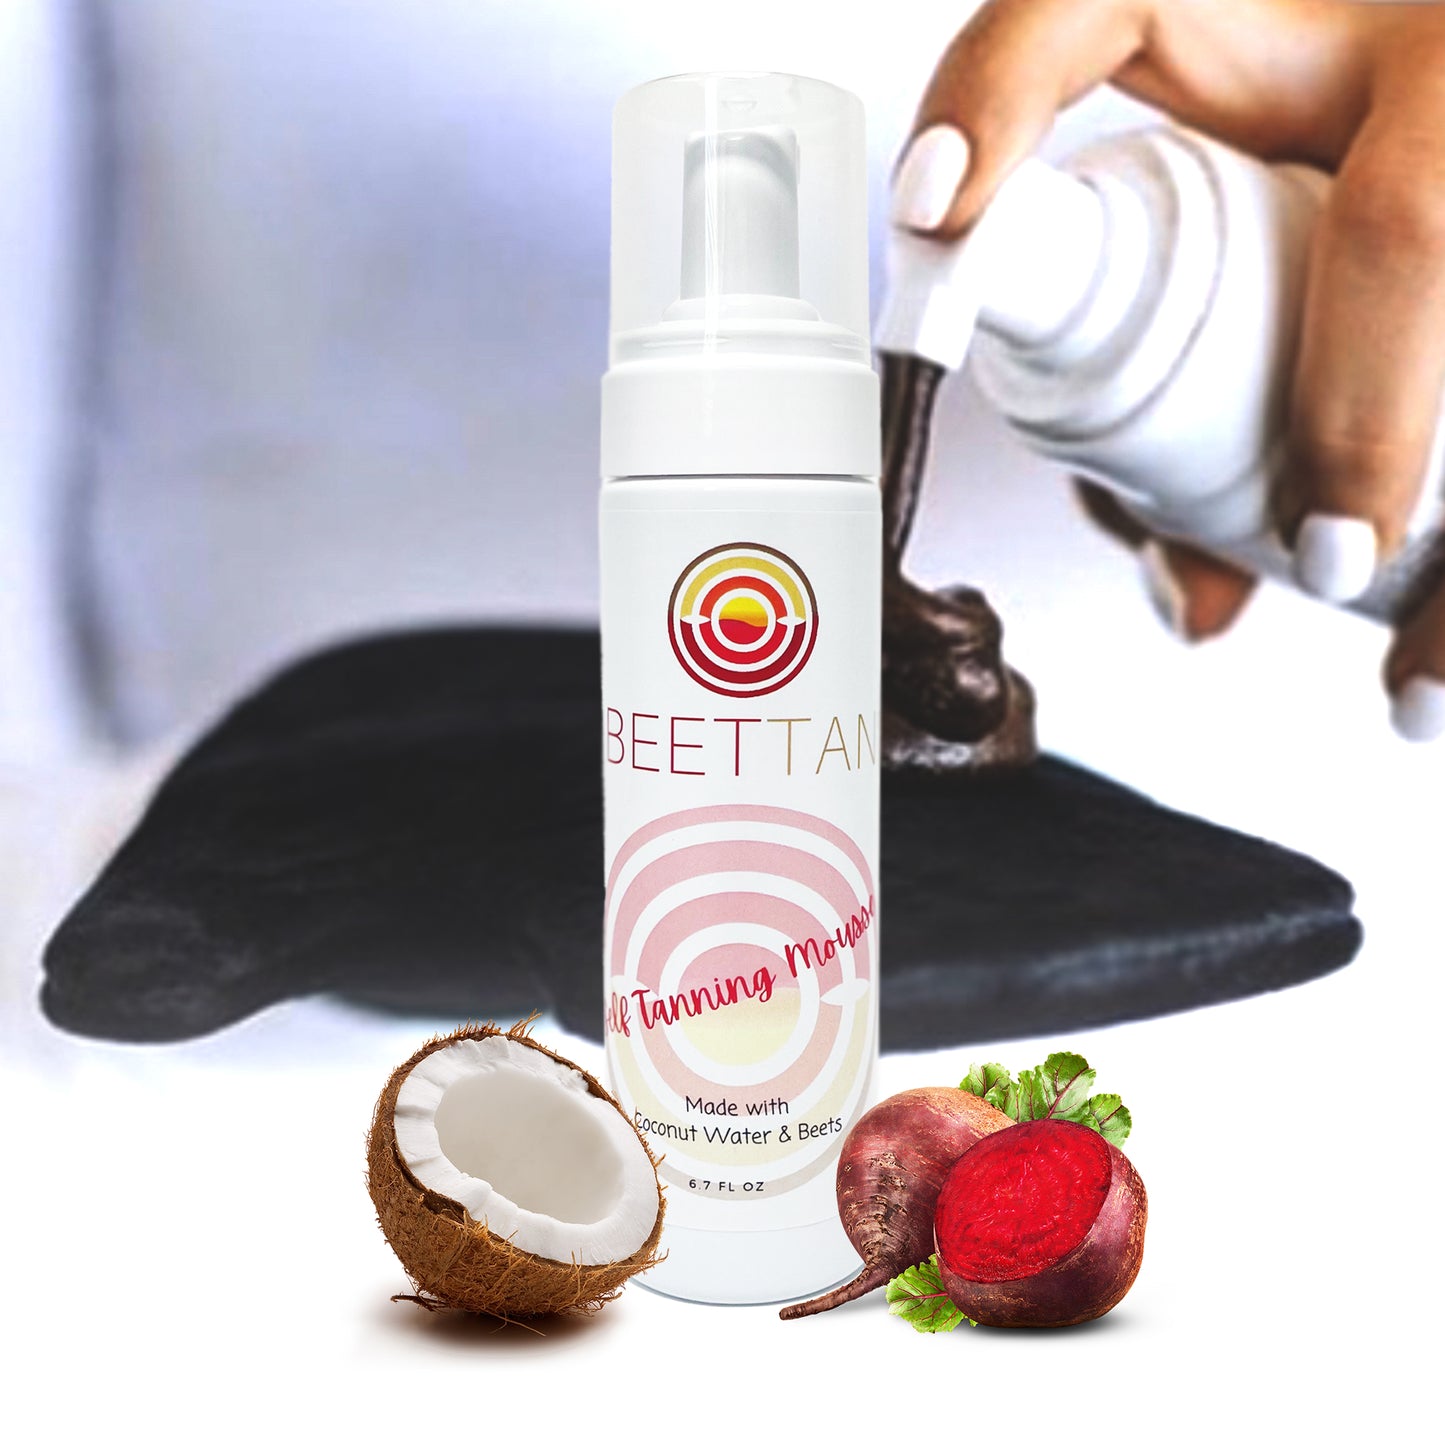 SELF TANNING MOUSSE (MADE W/ COCONUT WATER AND BEETS)